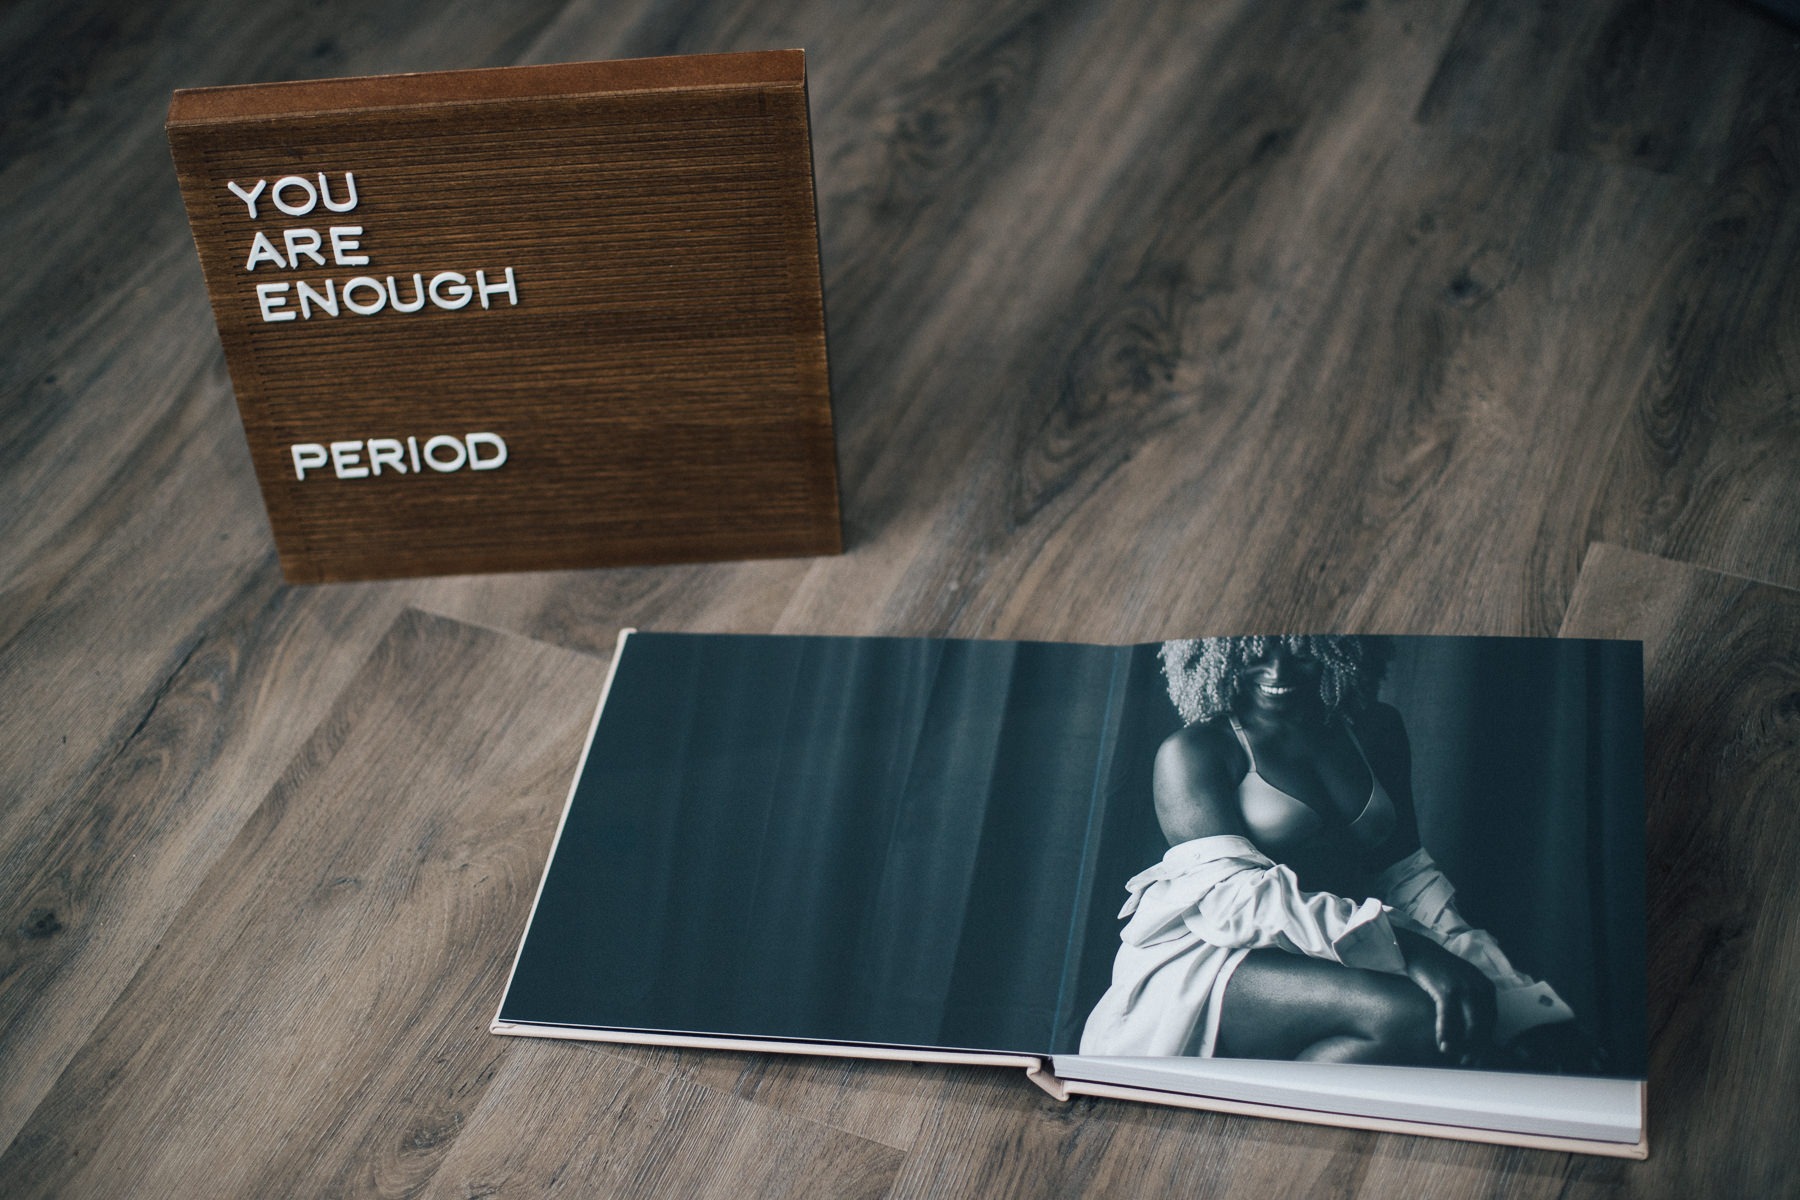 You Are Enough Period Love Yourself leather album opened to reveal a full spread of a black and white boudoir image 12x24 inches